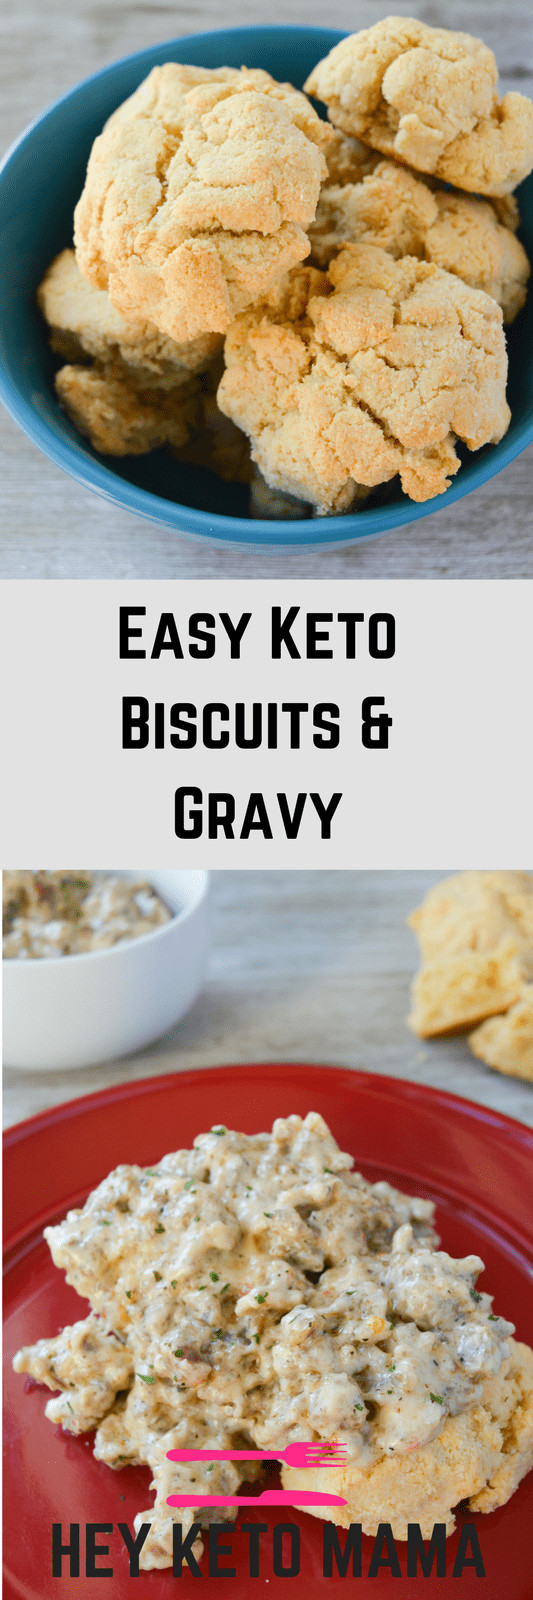 Keto Biscuits And Gravy
 Easy Keto Biscuits and Gravy Hey Keto Mama